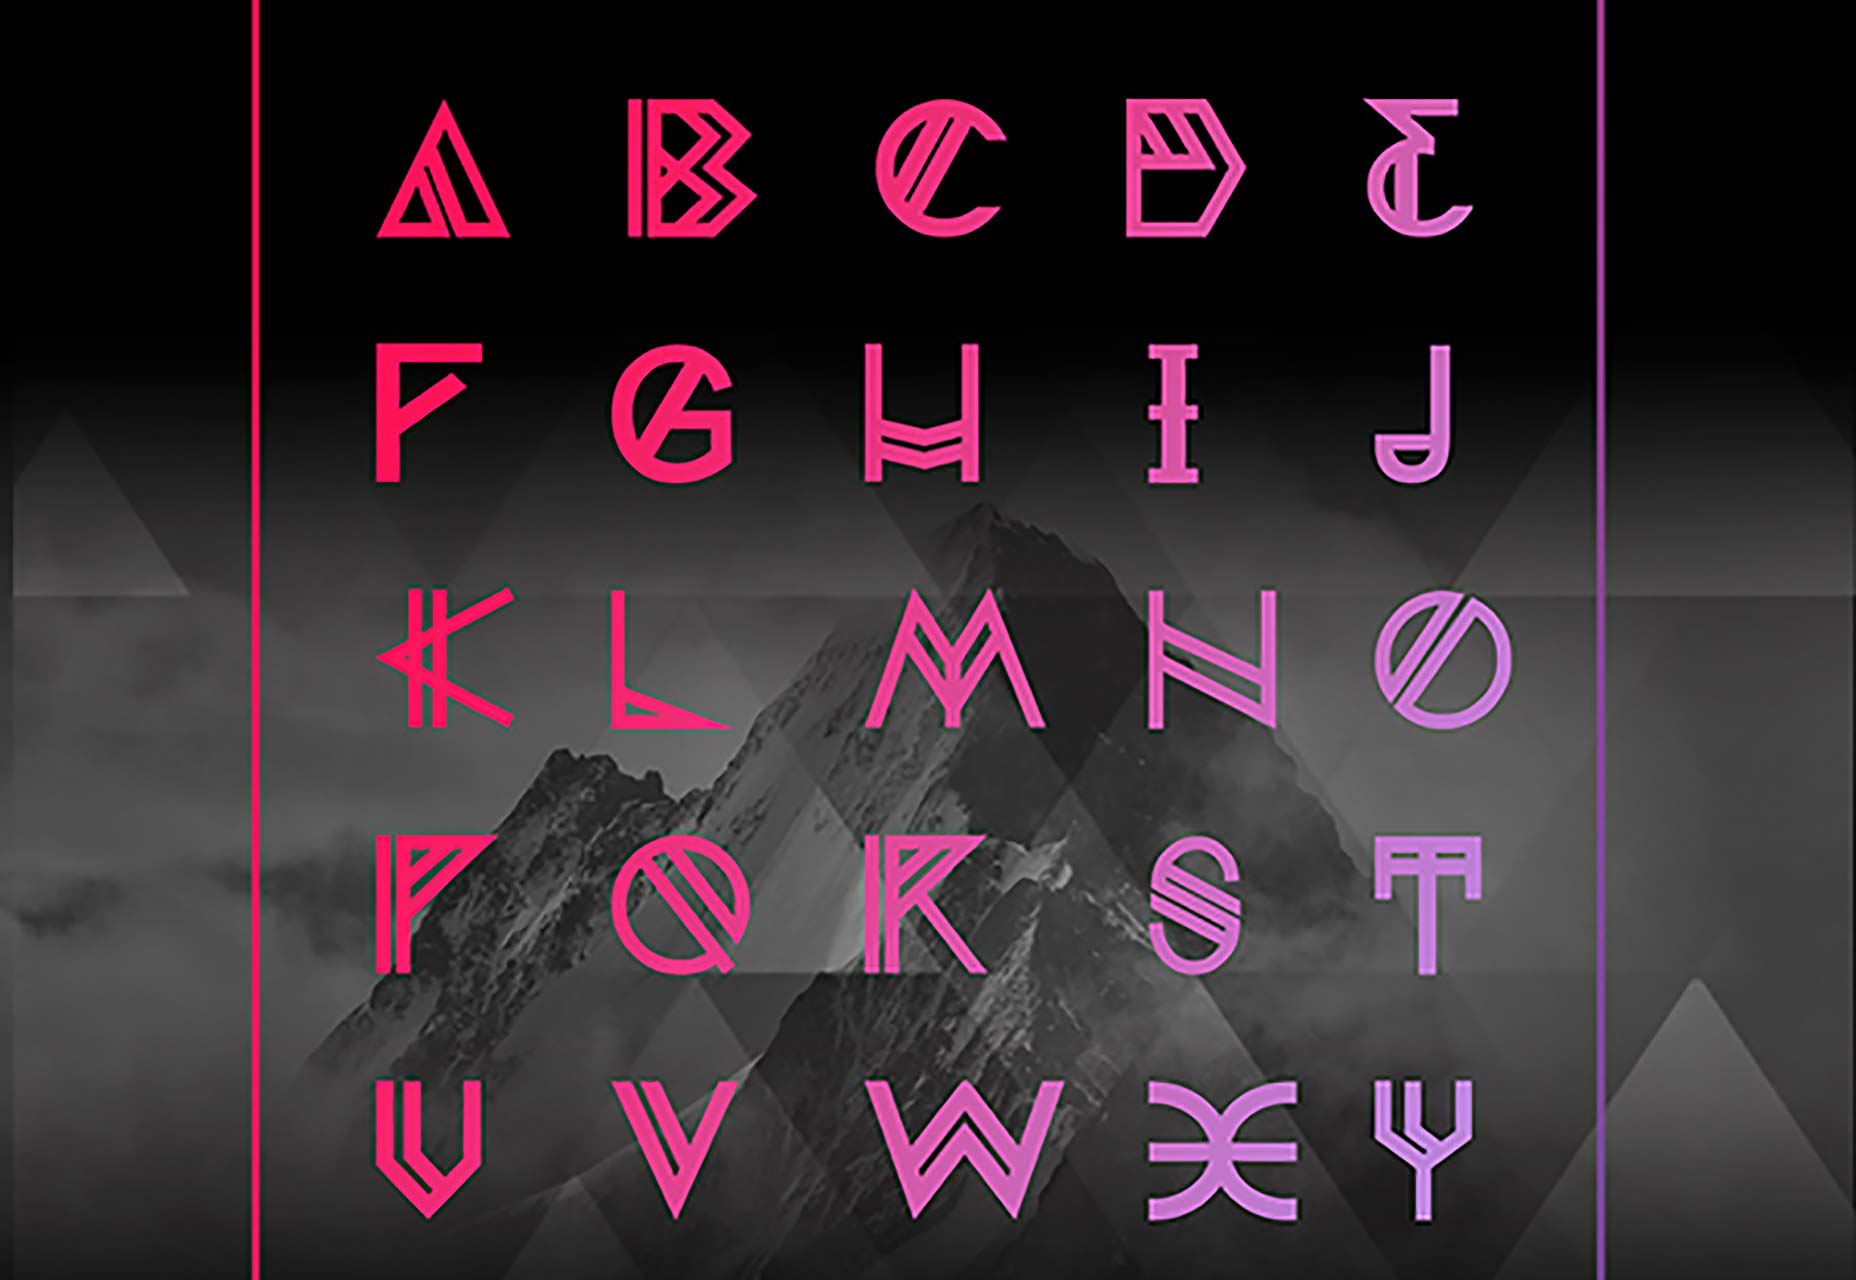 Nordic free fonts for designers